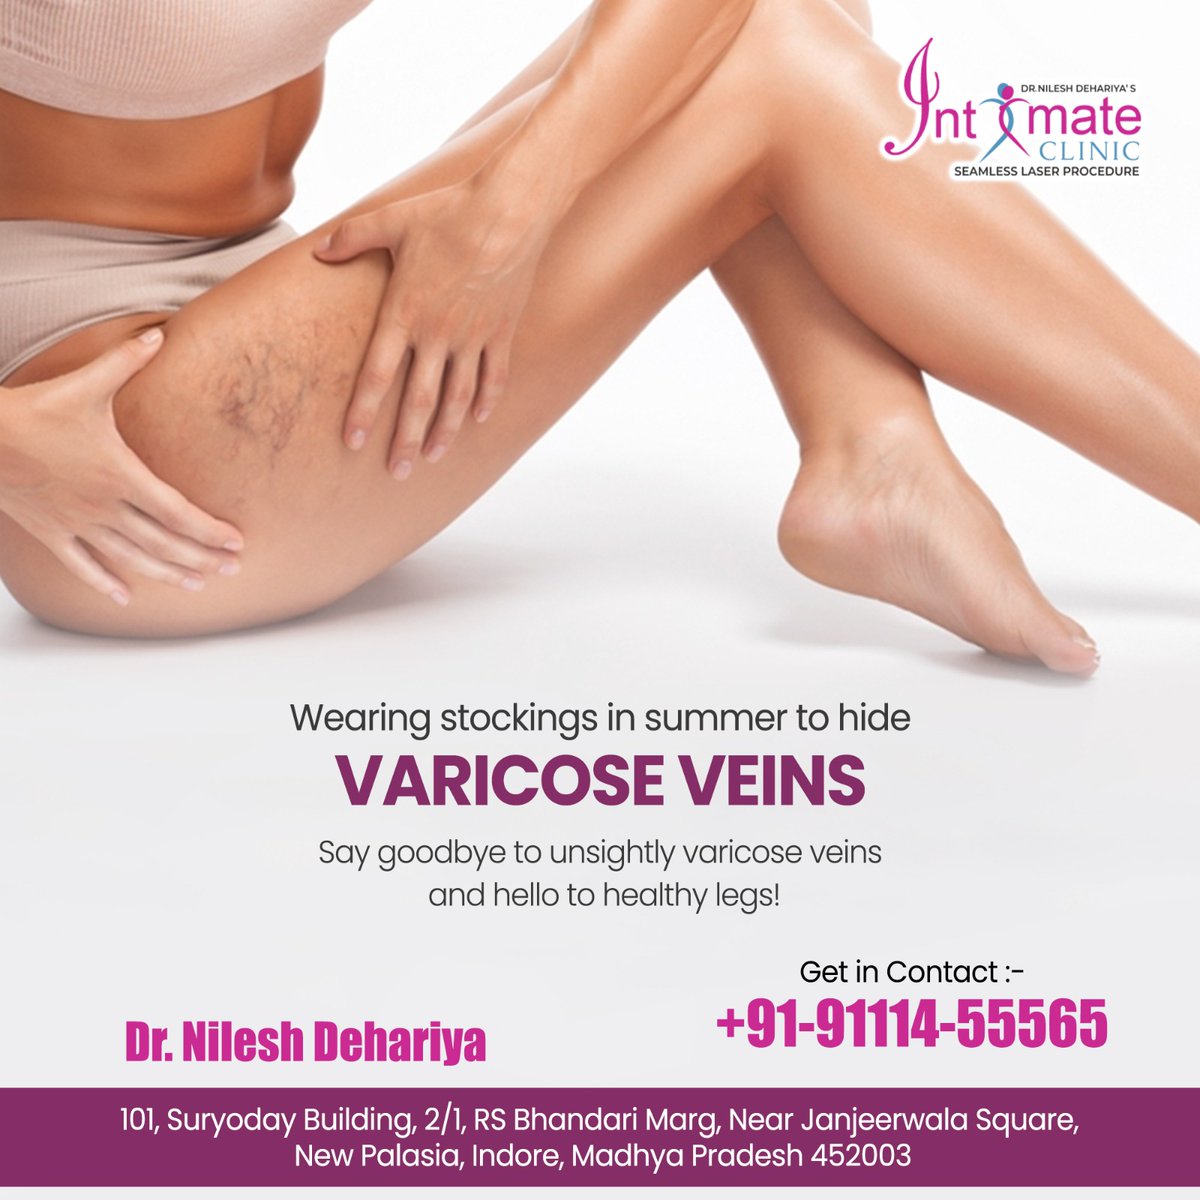 🌞 Summer might be hot, but your legs don't have to be! Stay cool and confident with stylish stockings designed to hide varicose veins. Don't let them hold you back from showing off those legs! 
.
.
visit: intimateclinic.in/varicose-veins…
.
#varicoseveins #veinhealth #veincare #legpain